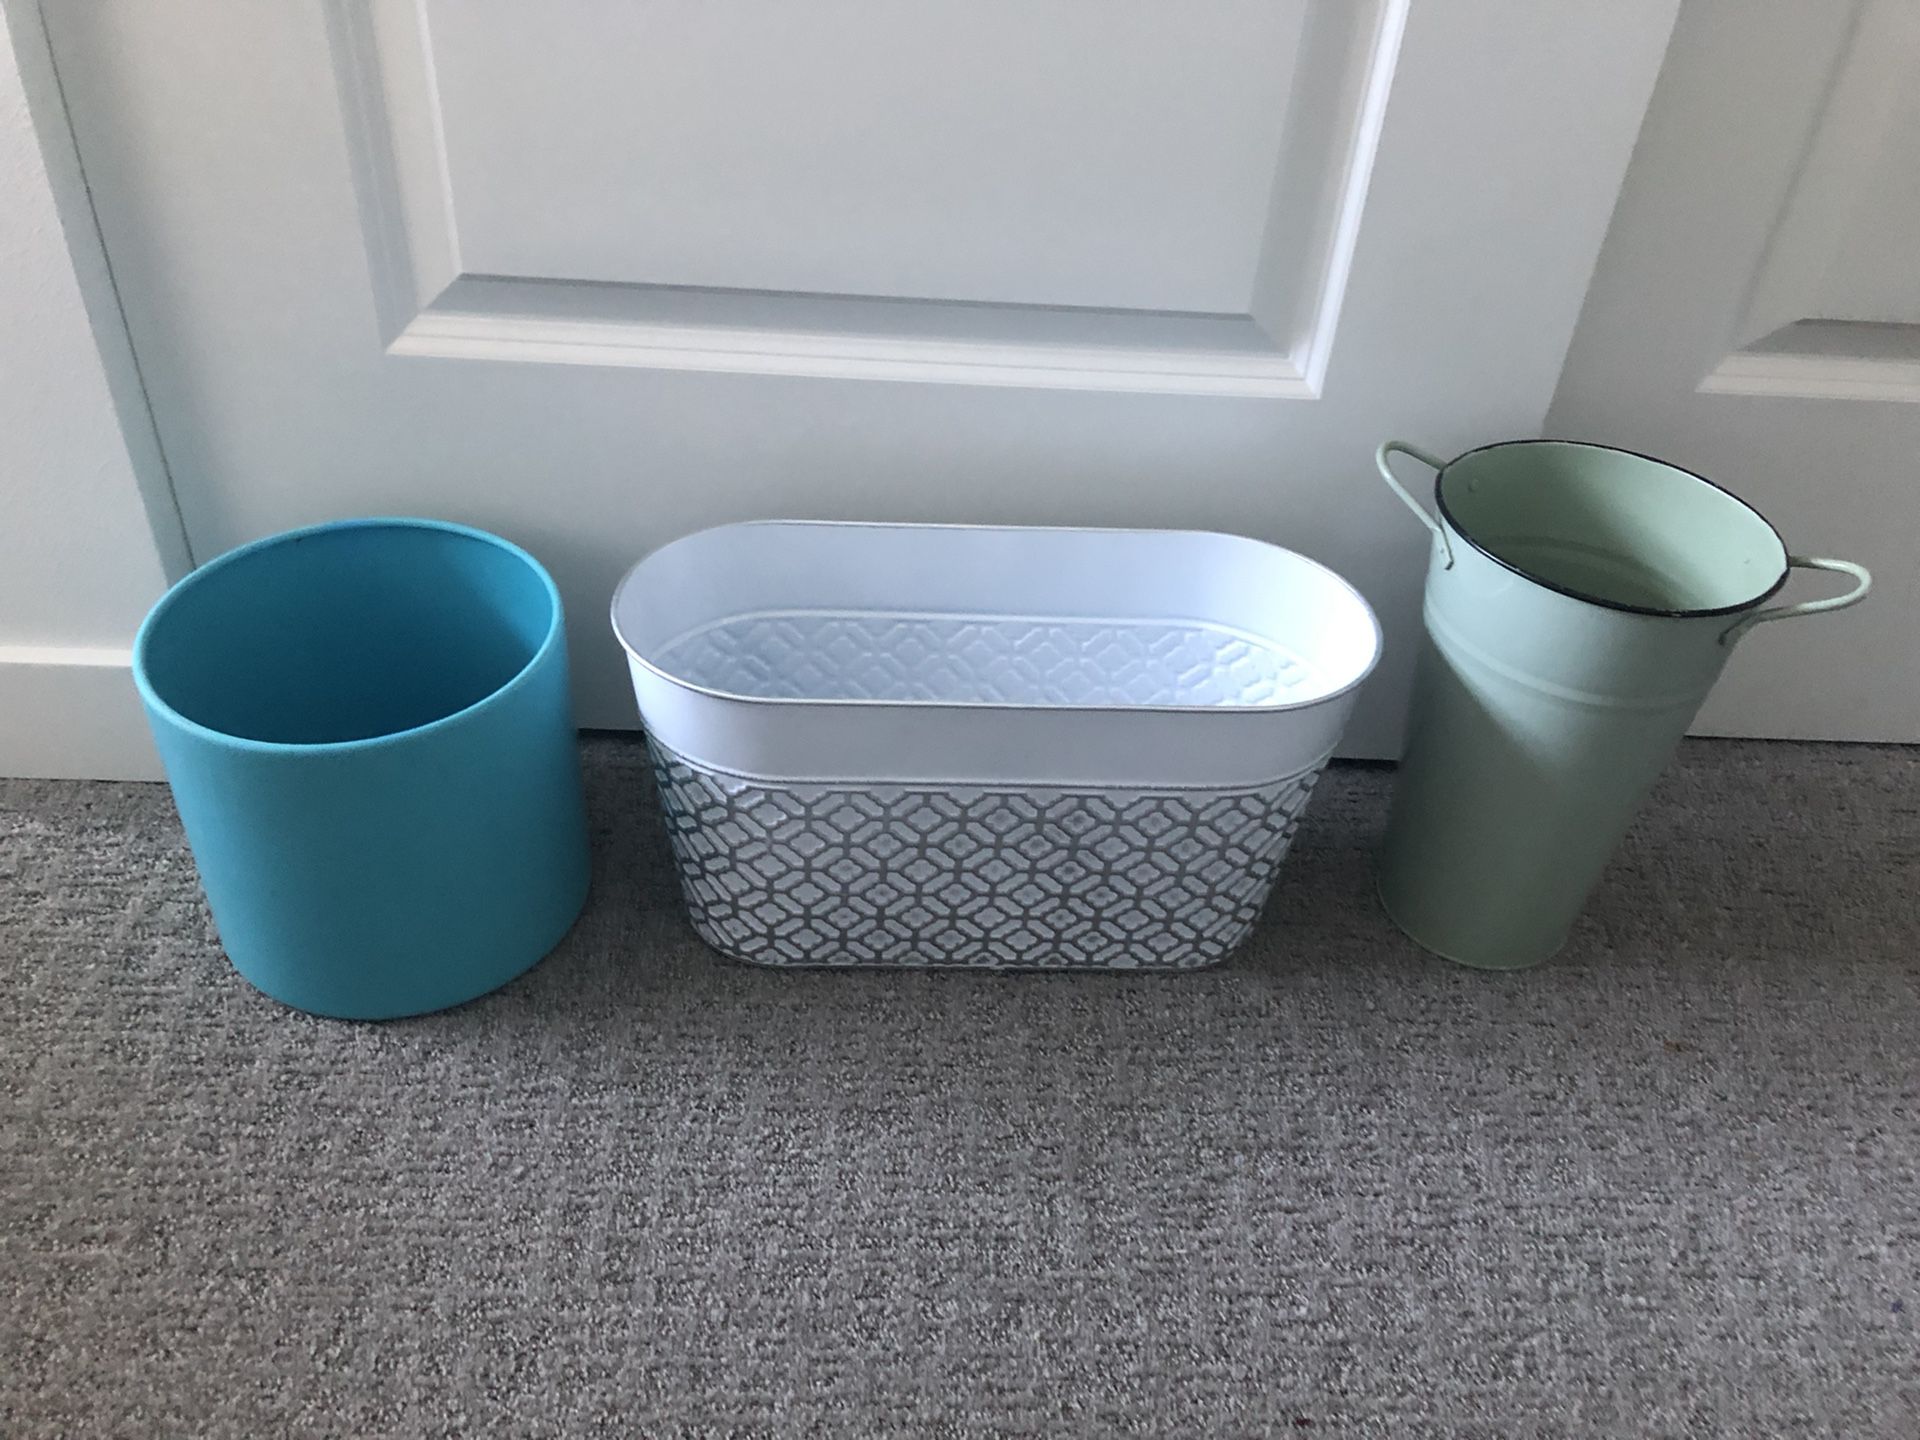 3 metal plant pots, all for $20